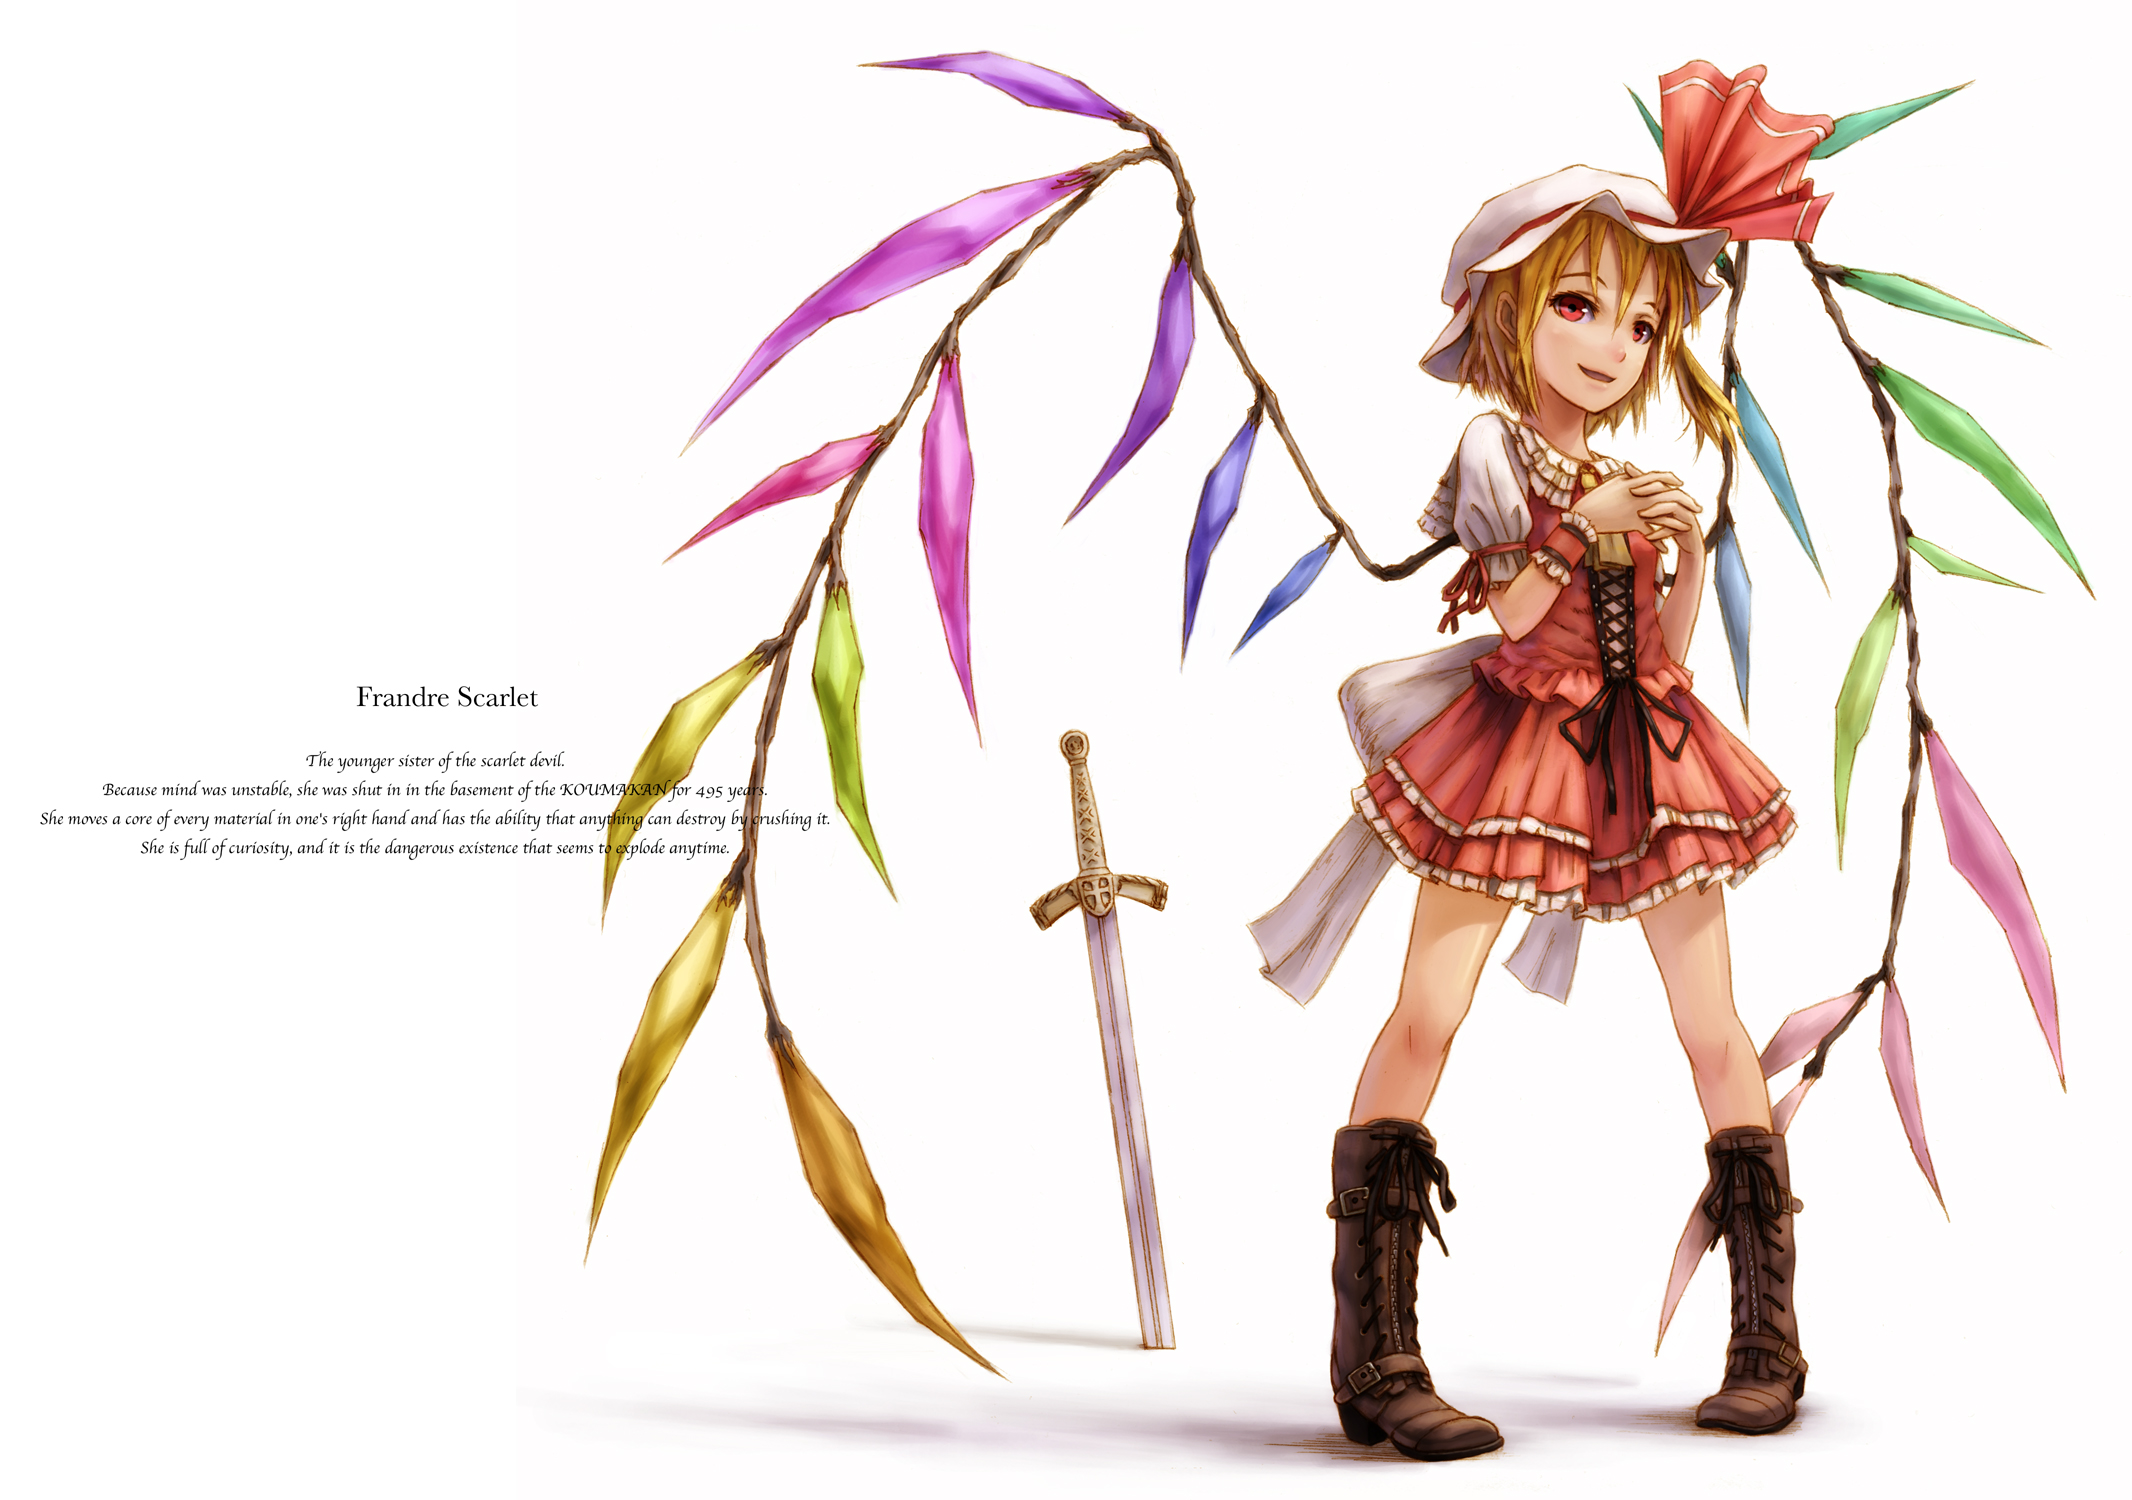 boots, blondes, video games, Touhou, wings, dress, text, ribbons, weapons, vampires, red eyes, short hair, bows, red dress, ponytails, Flandre Scarlet, cuffs, hats, simple background, swords, white background - desktop wallpaper